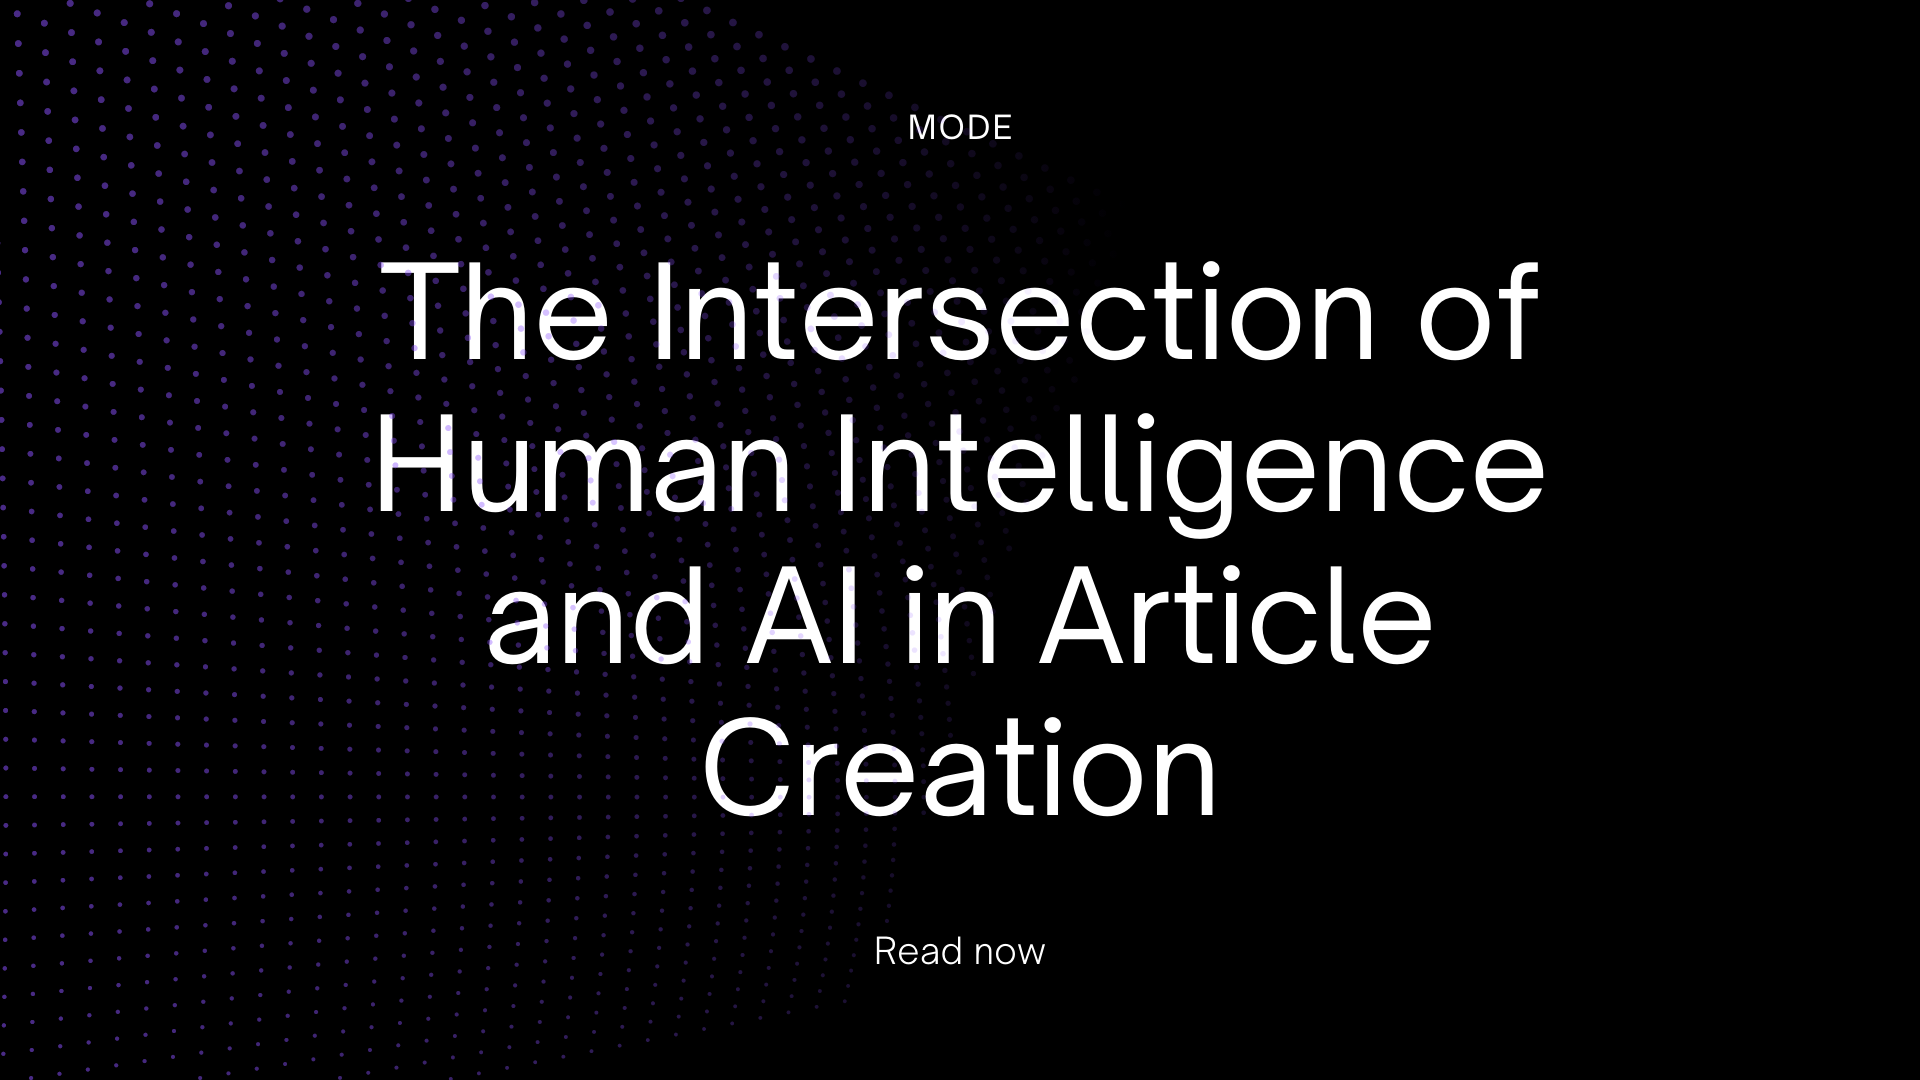 The Intersection of Human Intelligence and AI in Article Creation